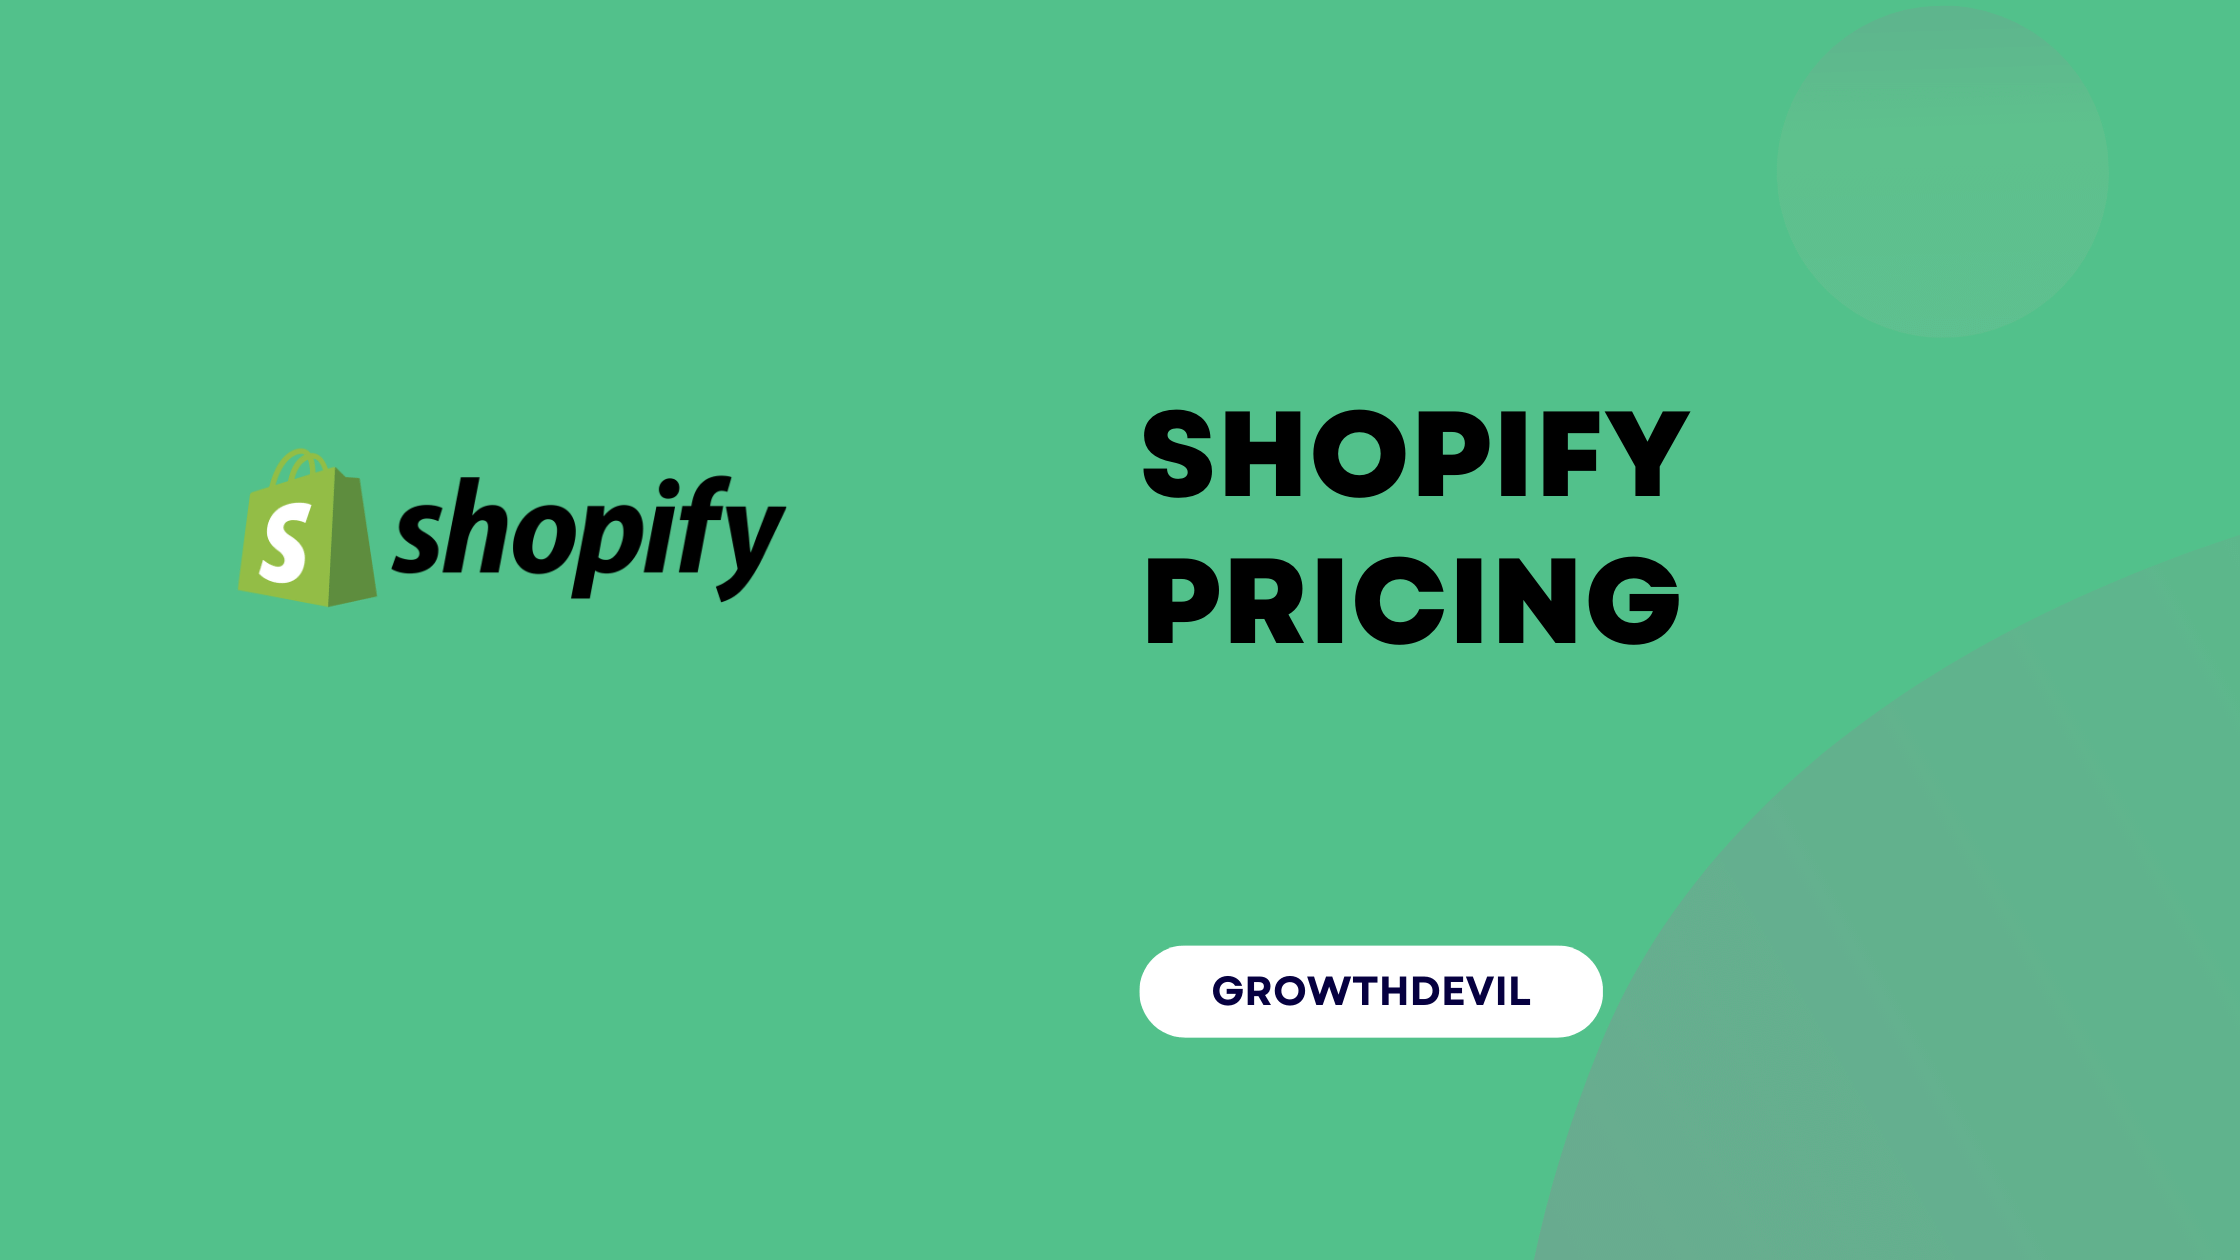 Shopify Pricing - GrowthDevil